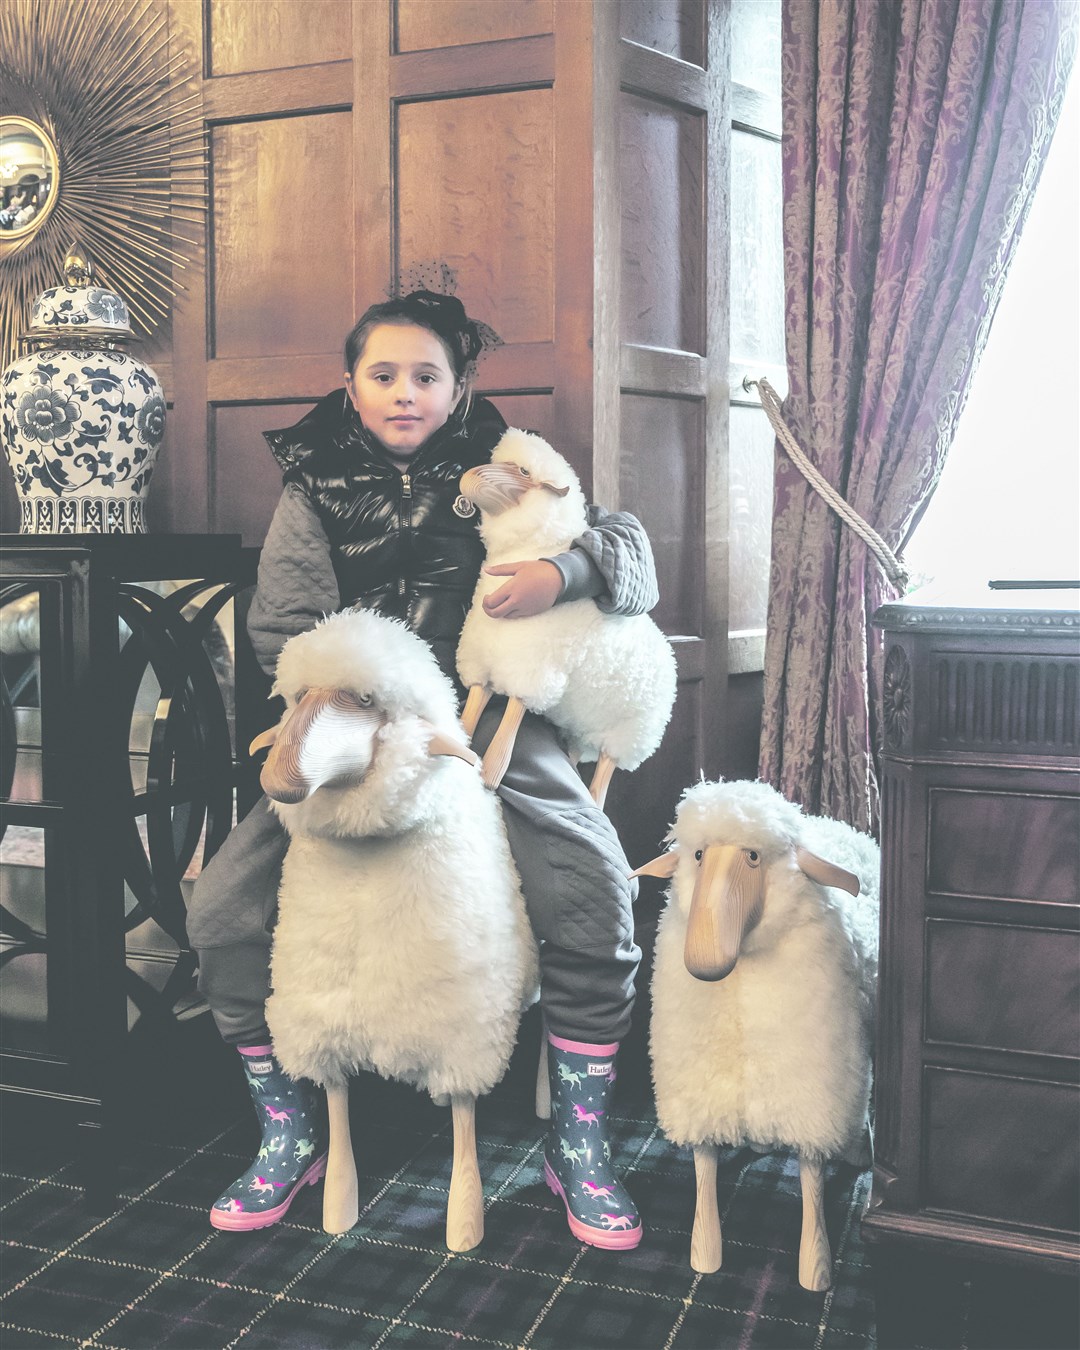 Ruchir’s daughter with her ‘sheep’ from Austria. One of the sheep has travelled to Spain and back!